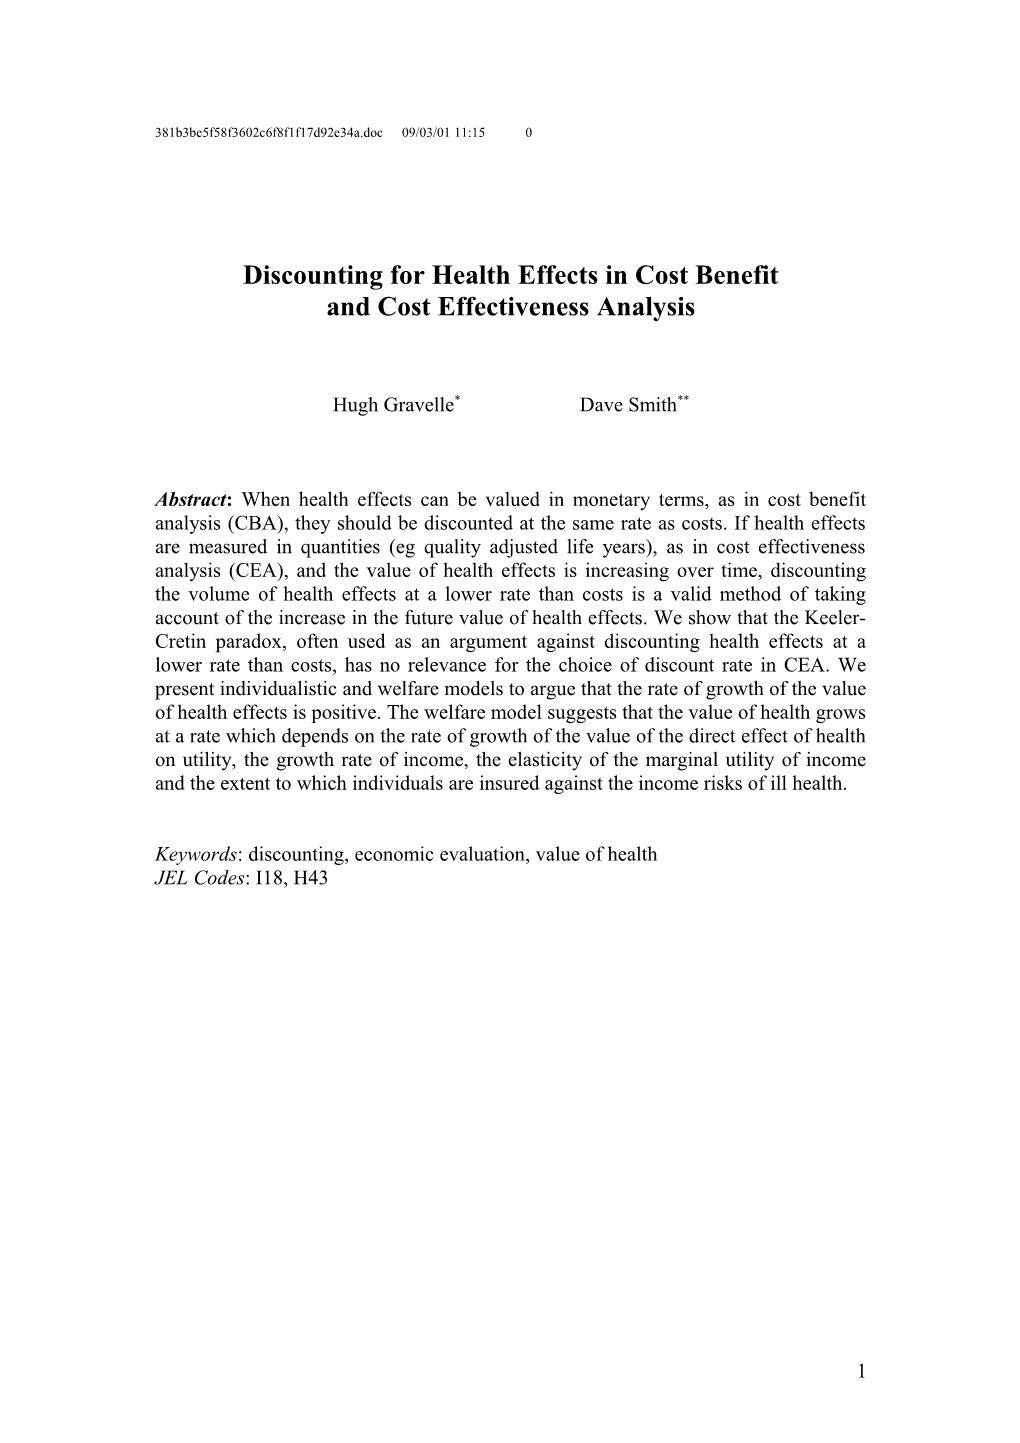 Discounting Health Effects